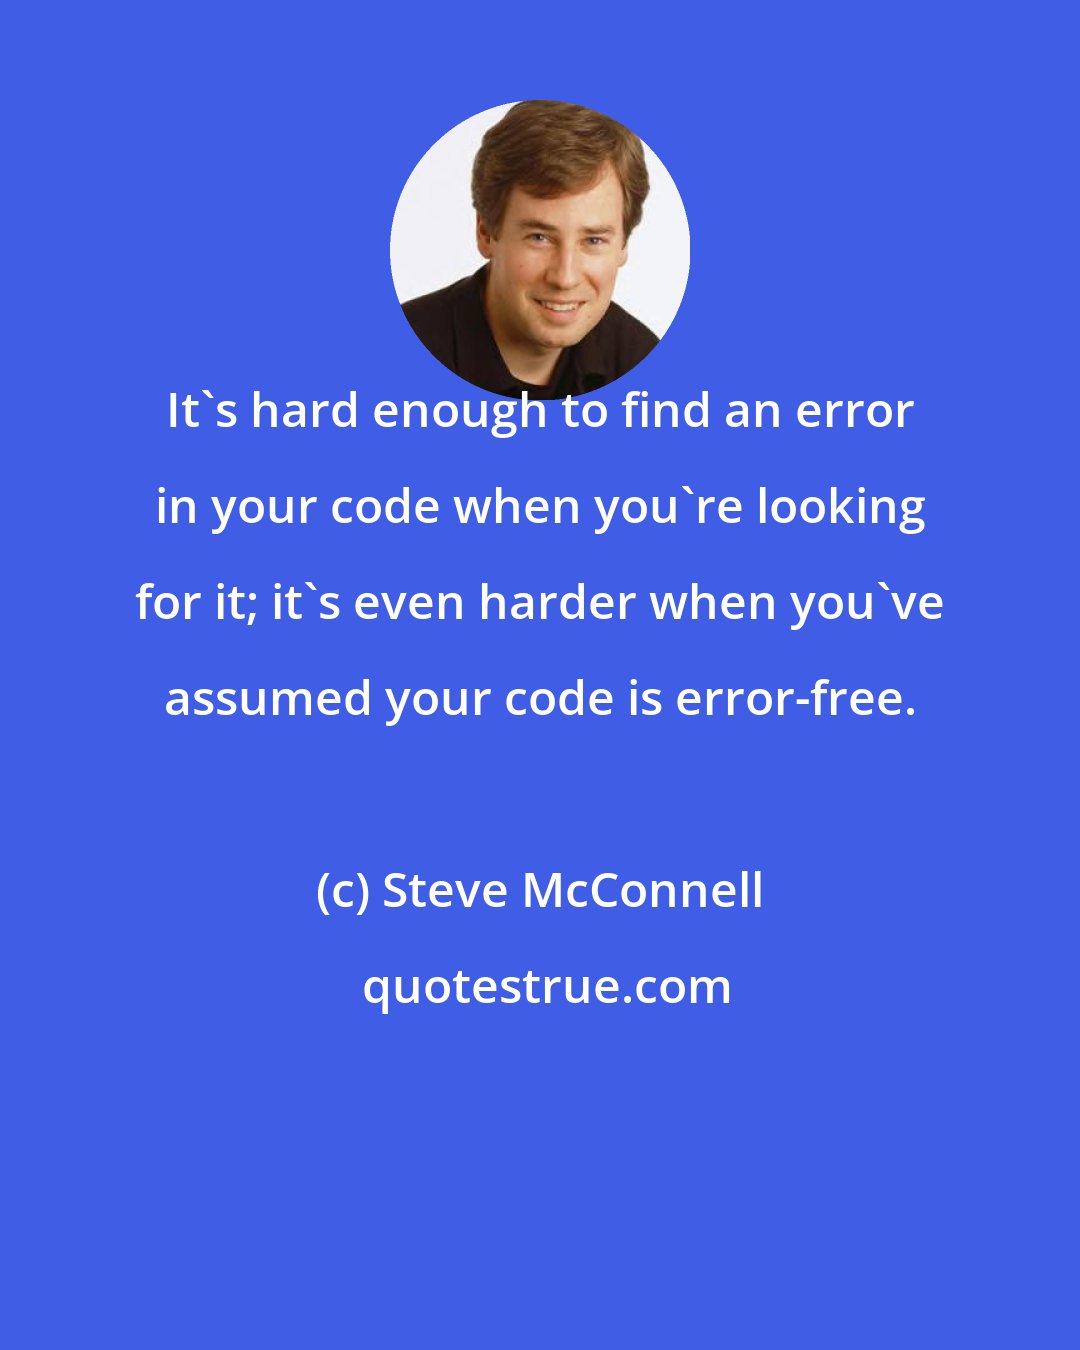 Steve McConnell: It's hard enough to find an error in your code when you're looking for it; it's even harder when you've assumed your code is error-free.